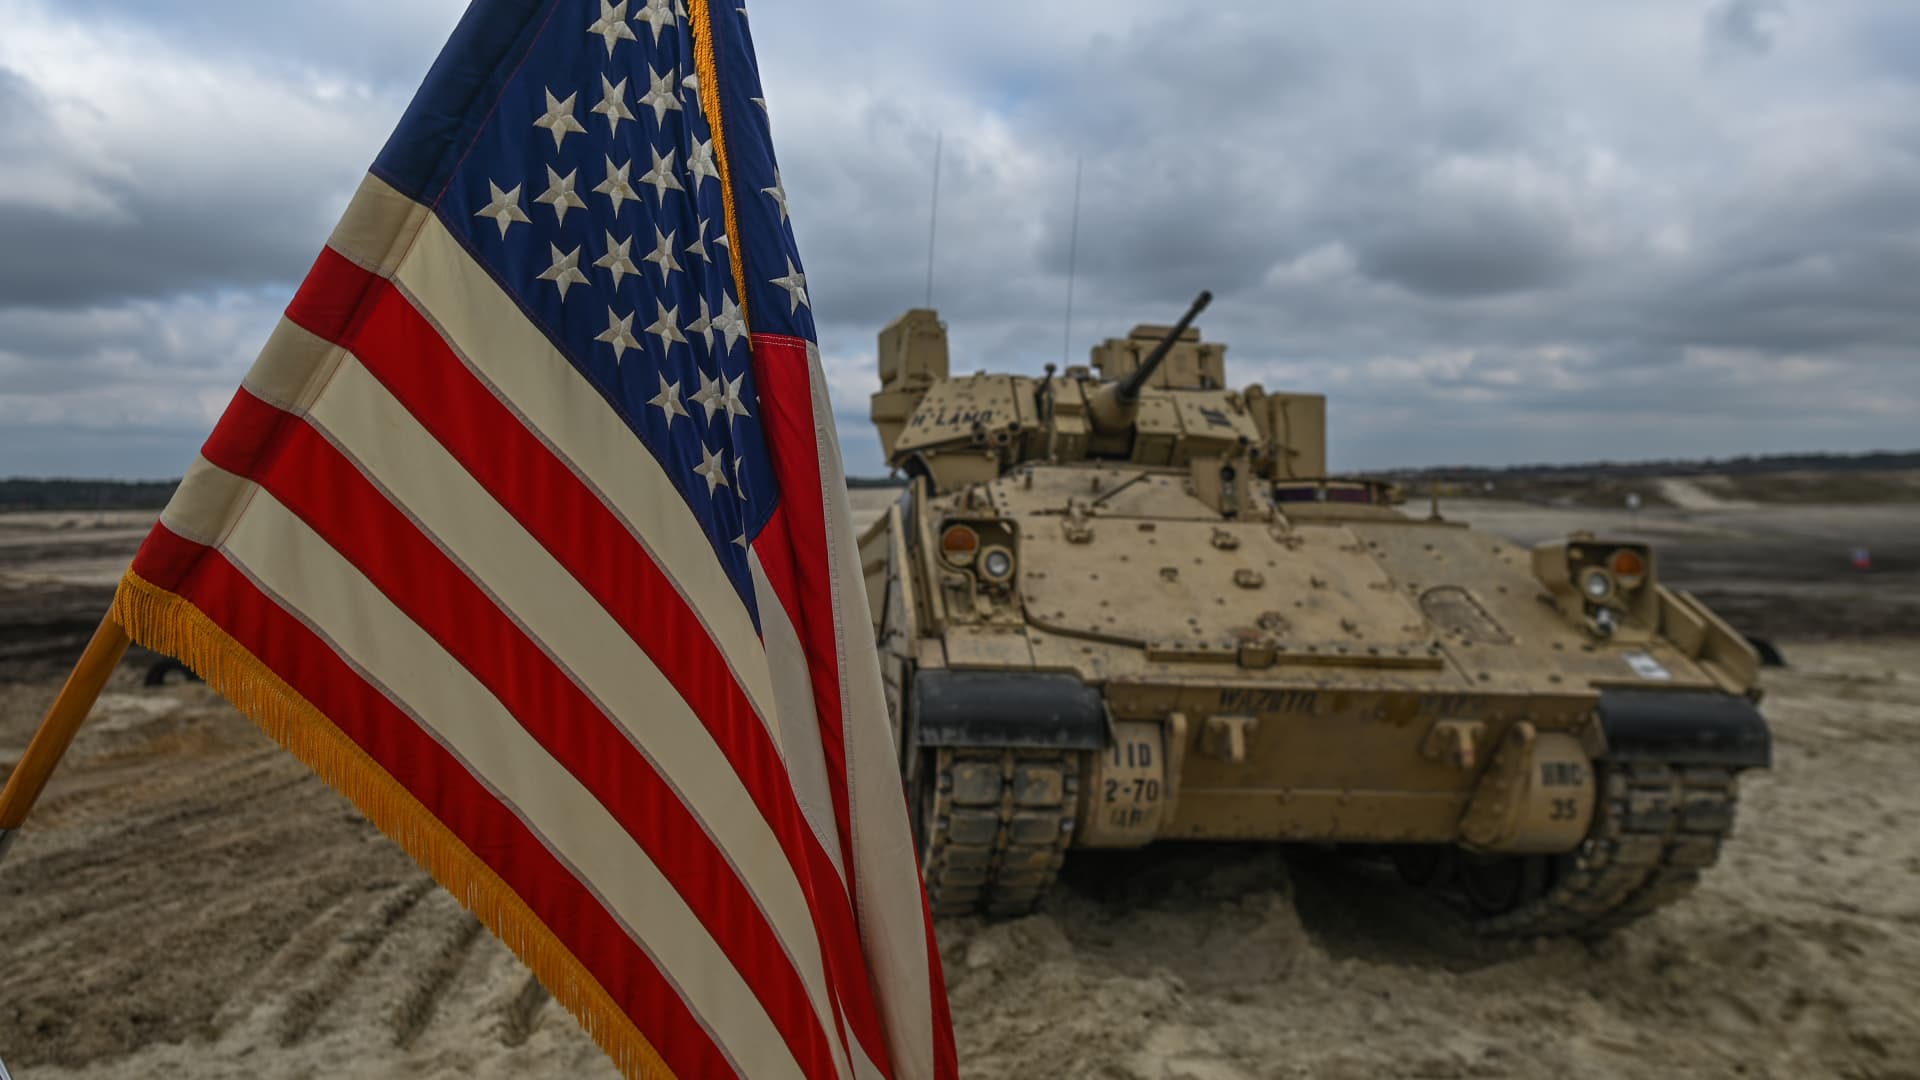 American soldiers of the 2nd Battalion, 70th Armor Regiment, 2nd Armored Brigade Combat Team, 1st Infantry Division supporting the 4th Infantry Division, are seen during a high-intensity training session utilizing Bradley Fighting Vehicle at Nowa DÄba training ground in Nowa Deba, Poland on April 12, 2023.